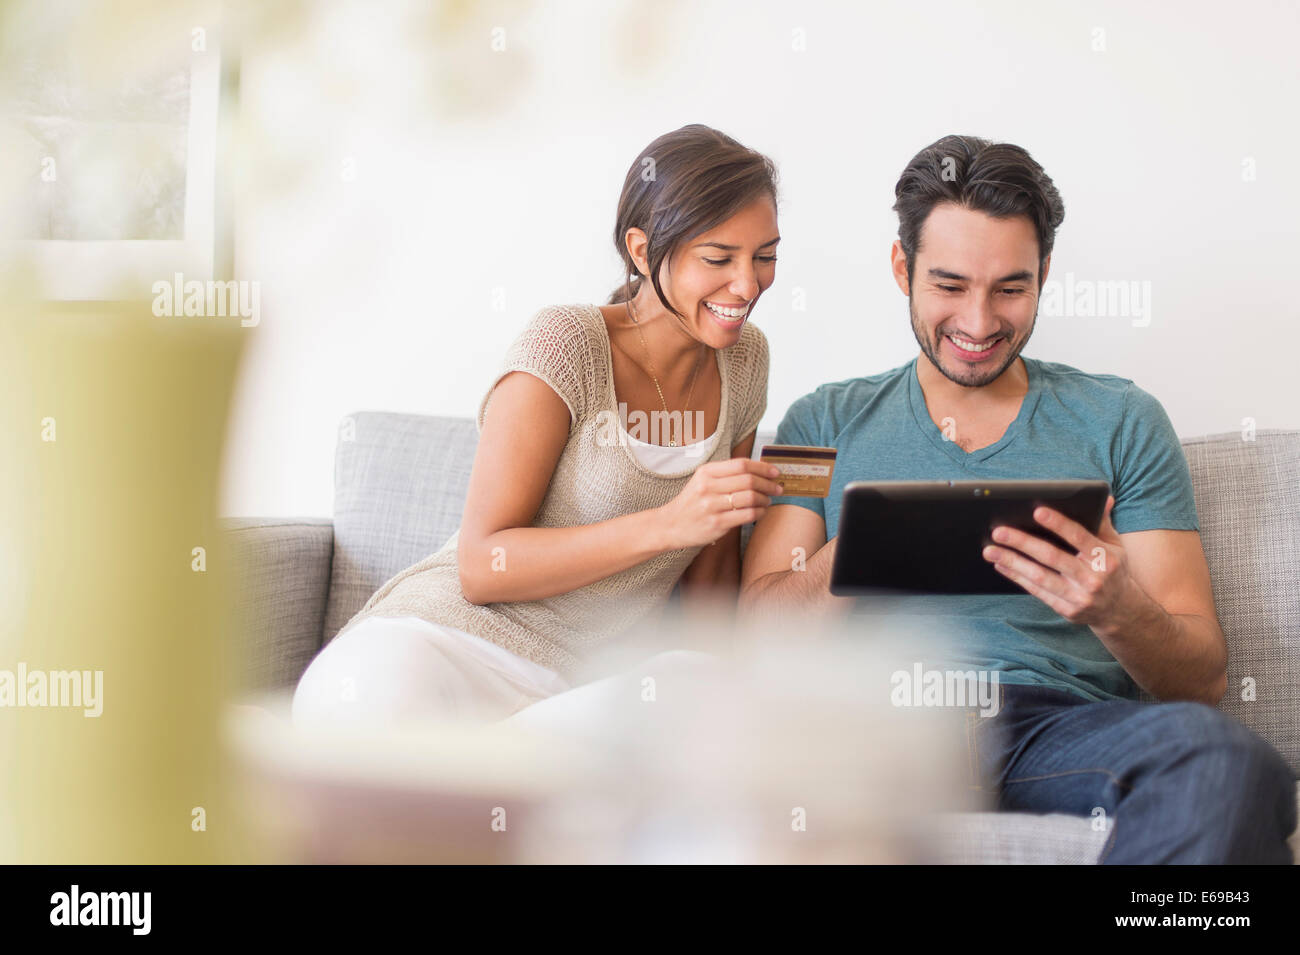 Couple shopping together on digital tablet Stock Photo